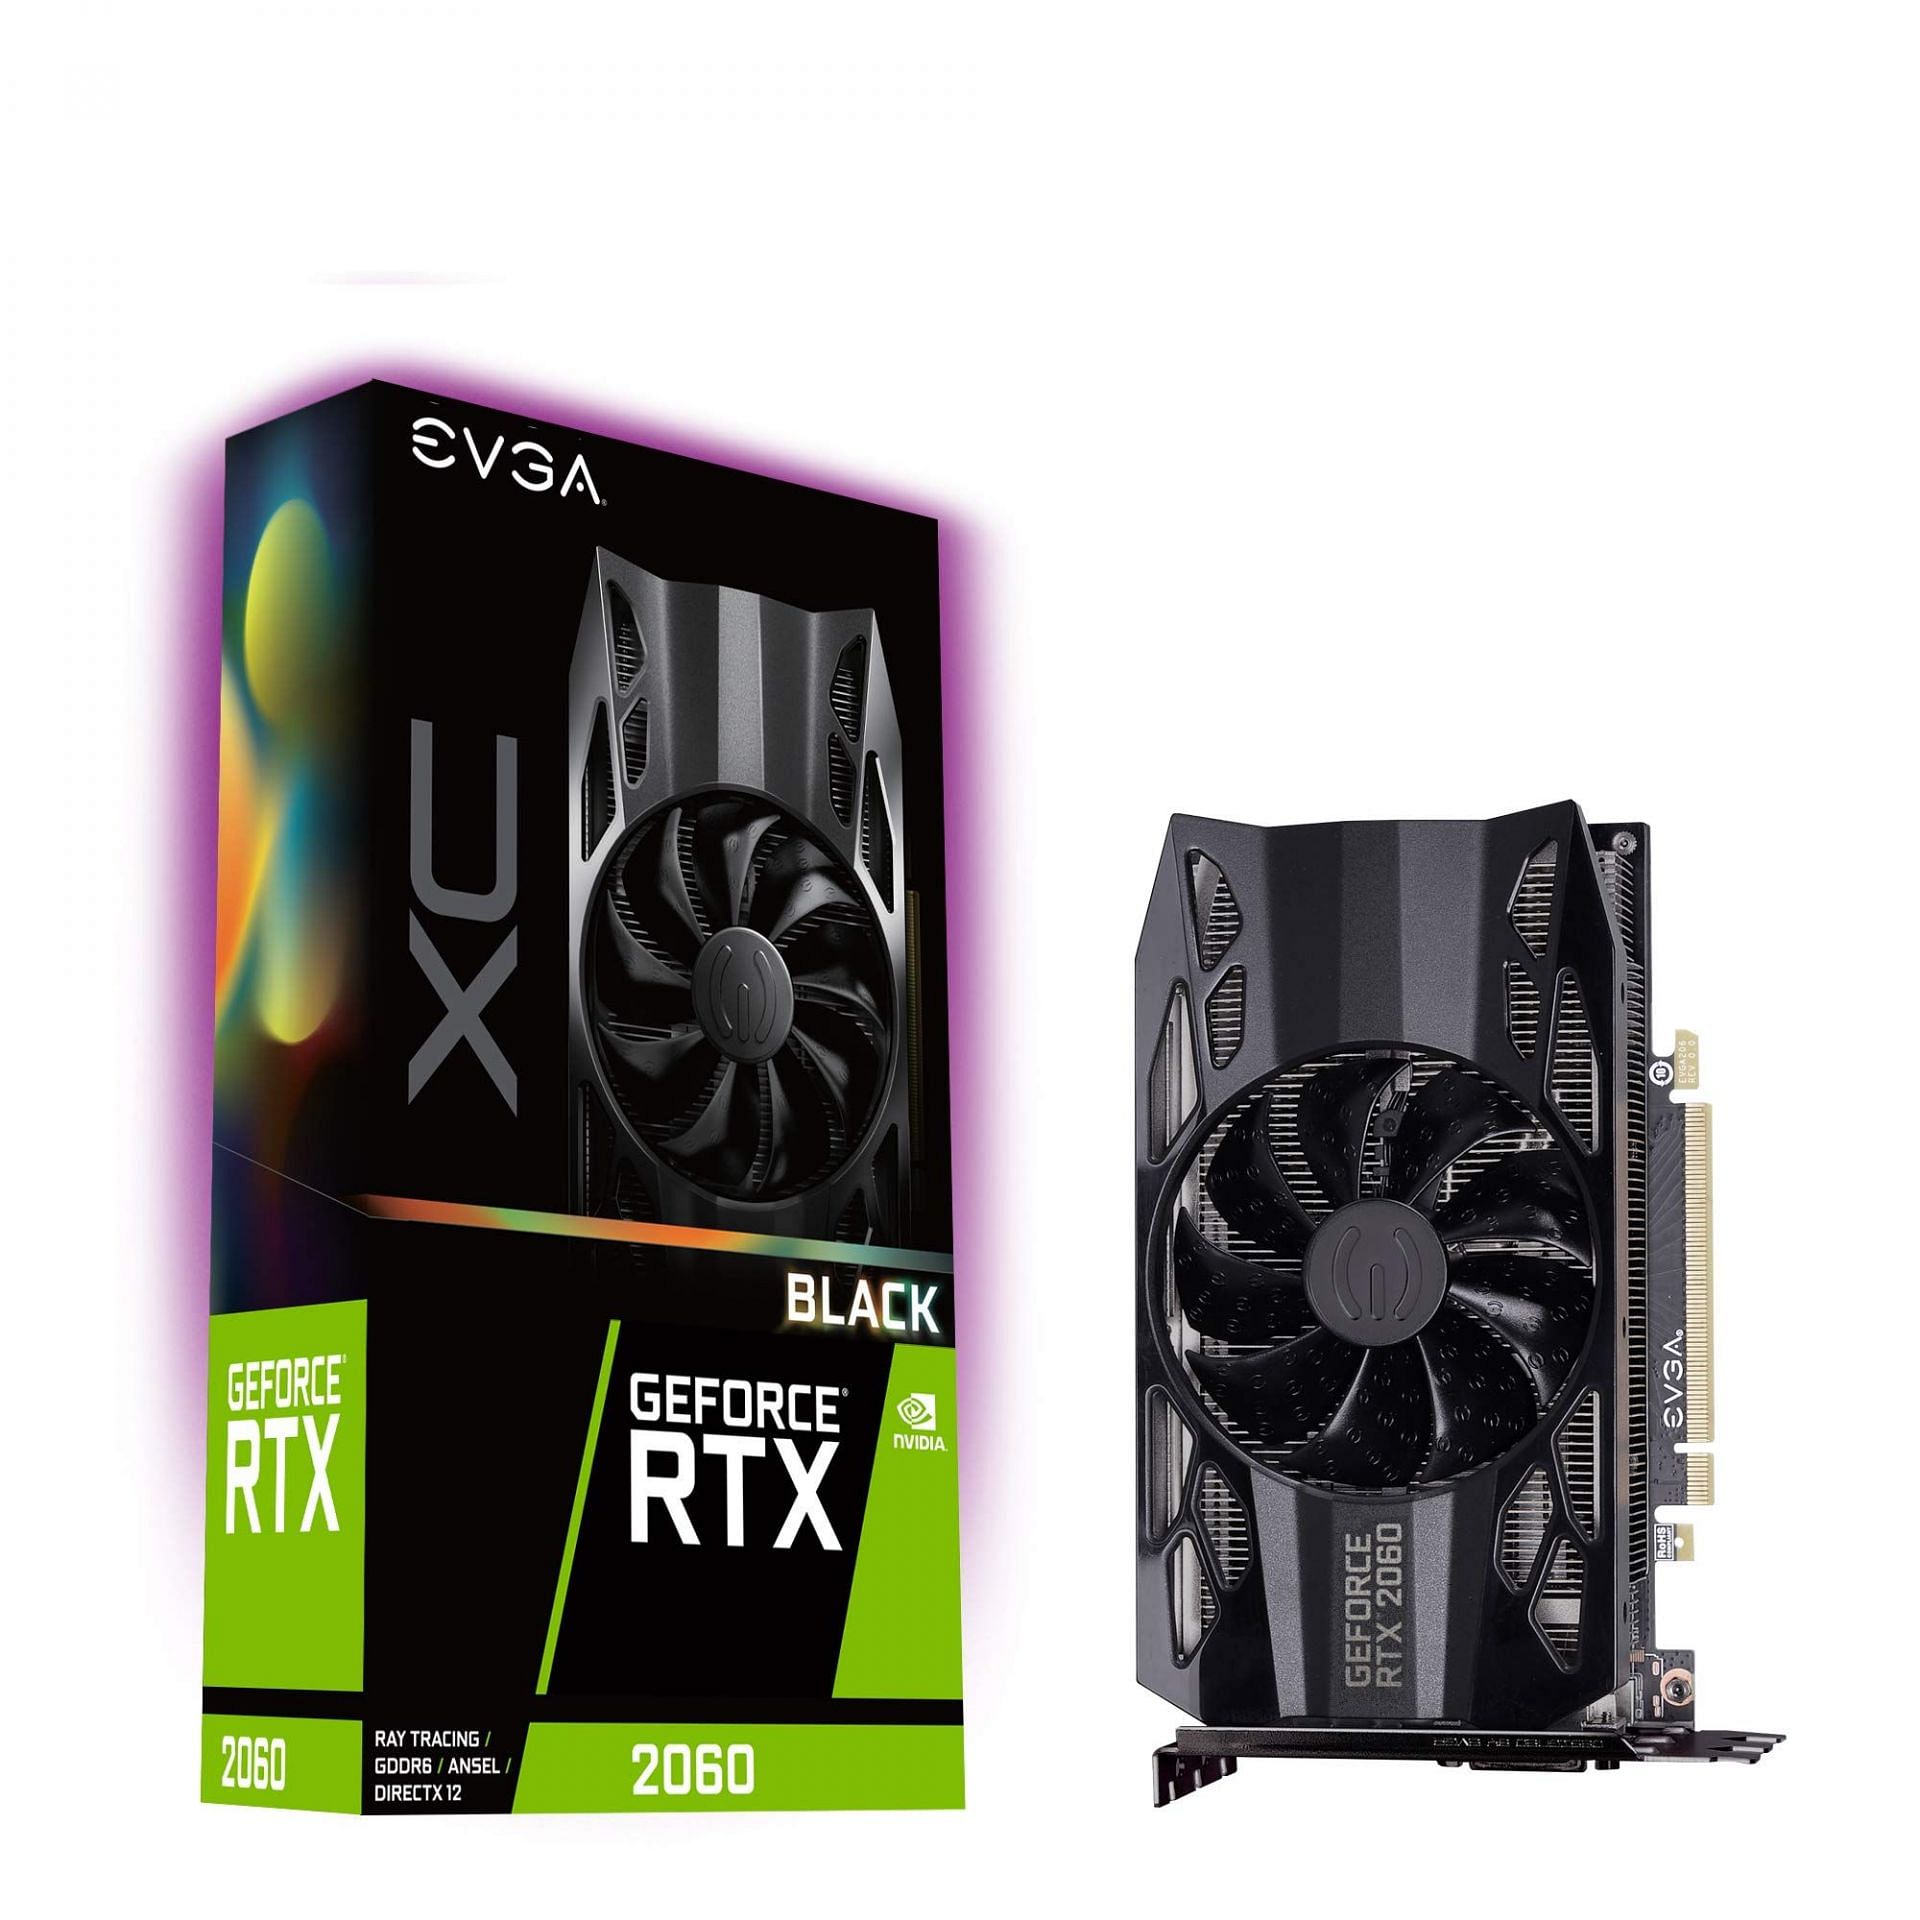 5 best lowprofile graphic cards for gaming in 2022